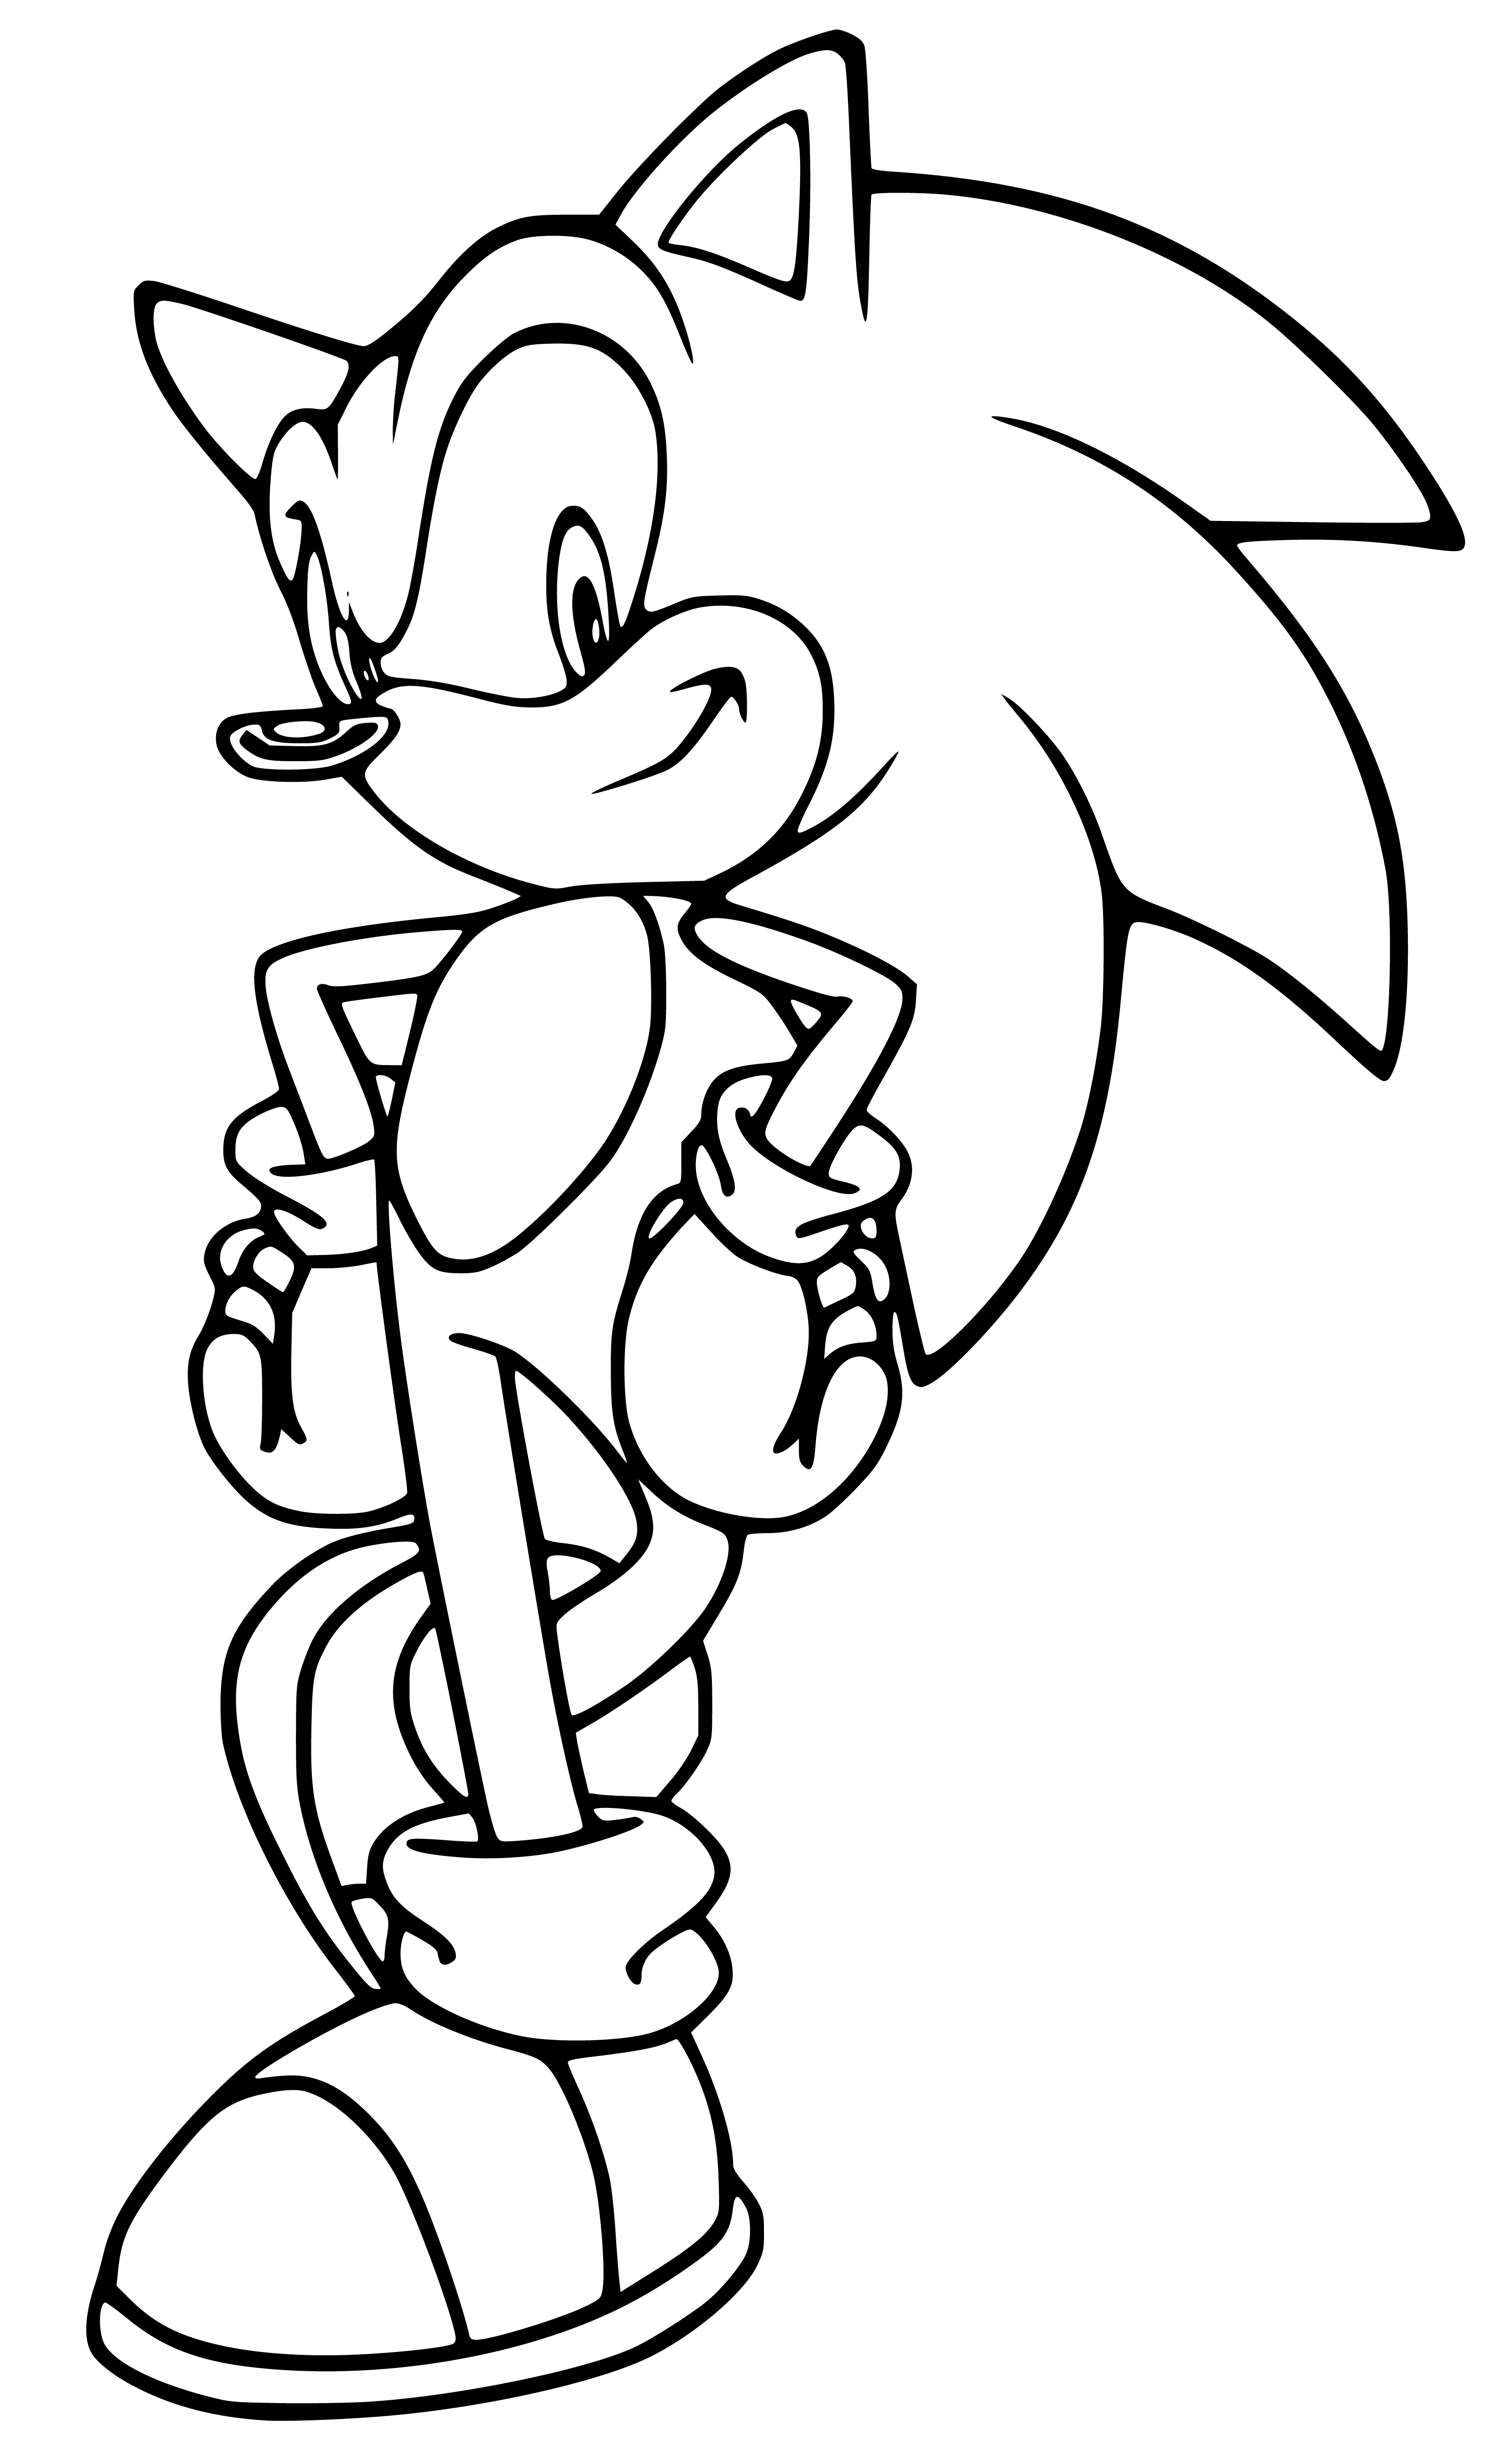 Sonic the Hedgehog Simple and Easy for Kids Coloring Pages - SheetalColor.com